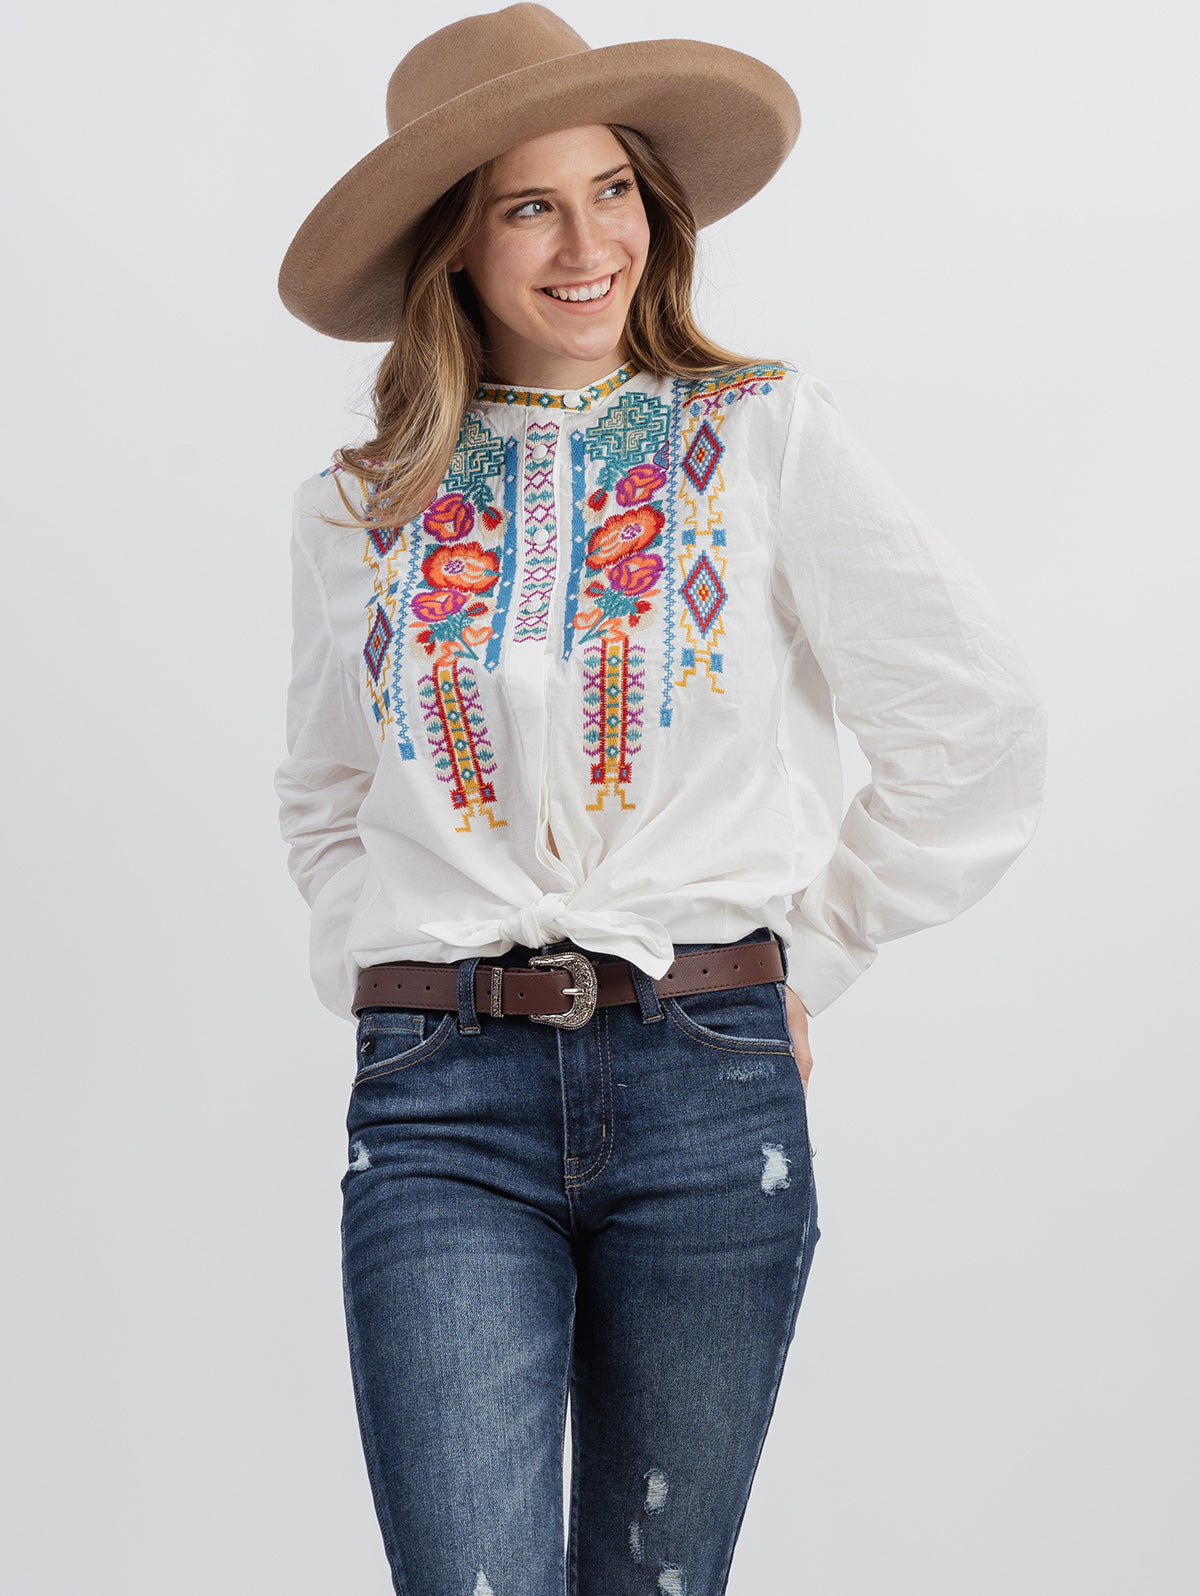 American Bling Women Aztec&Floral Embroidered Long Sleeve Shirt - Montana West World